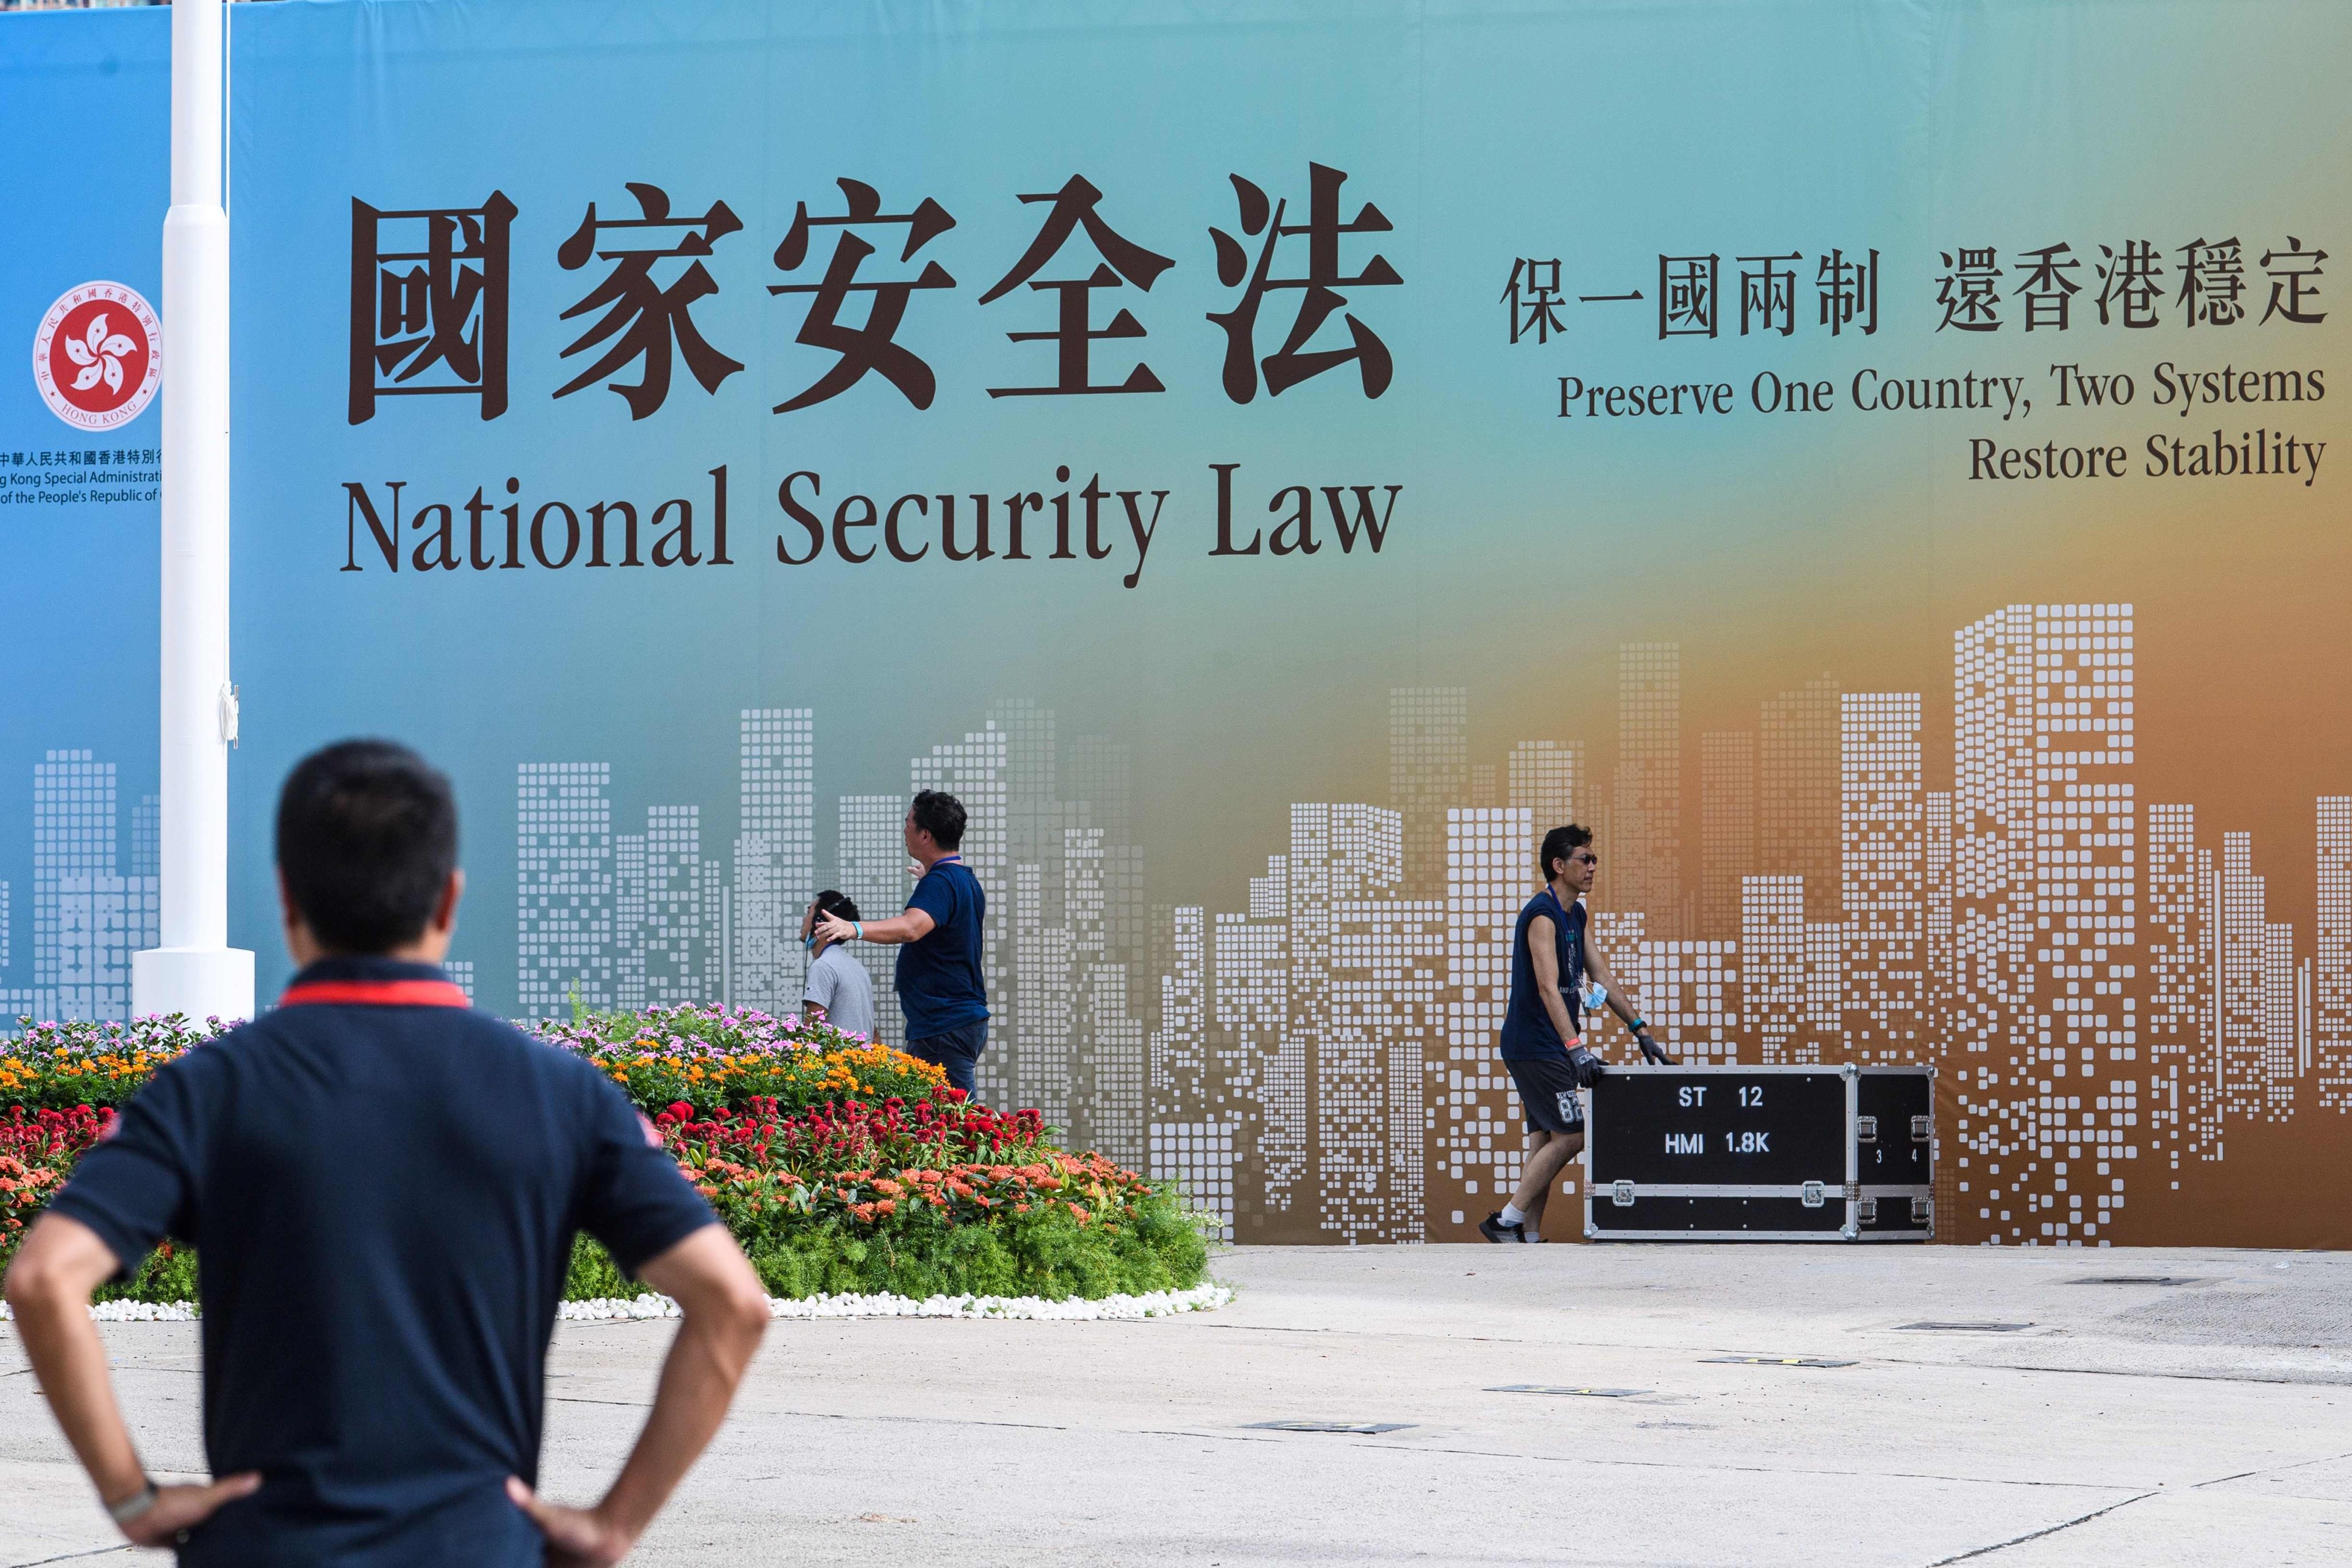 A national security law banner in Hong Kong on July 1, 2020. Beijing adopted a minimalist approach, only legislating for those laws immediately required to cope with 2019 social disorder. Photo: AFP